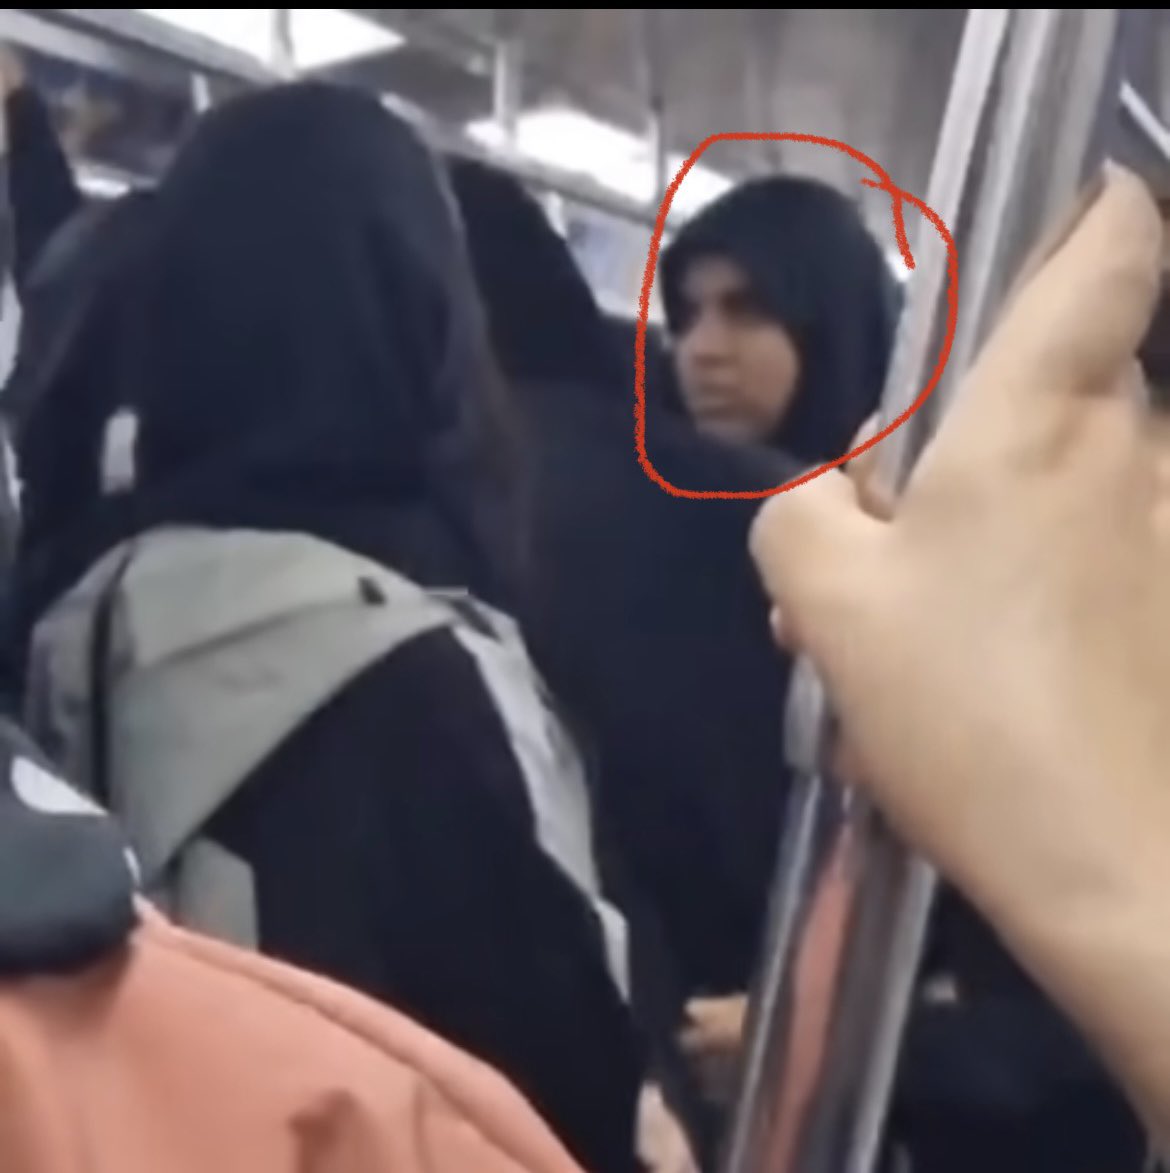 Fight break out on subway train between brave Iranian women and these none-Iranian occupiers - even with this low resolution screen shot you can tell… where are these people from?!
#occupiedIran #RezaPahlaviIsMyRepresentative #irgcterrorists #iranrevolution #MahsaAmini…